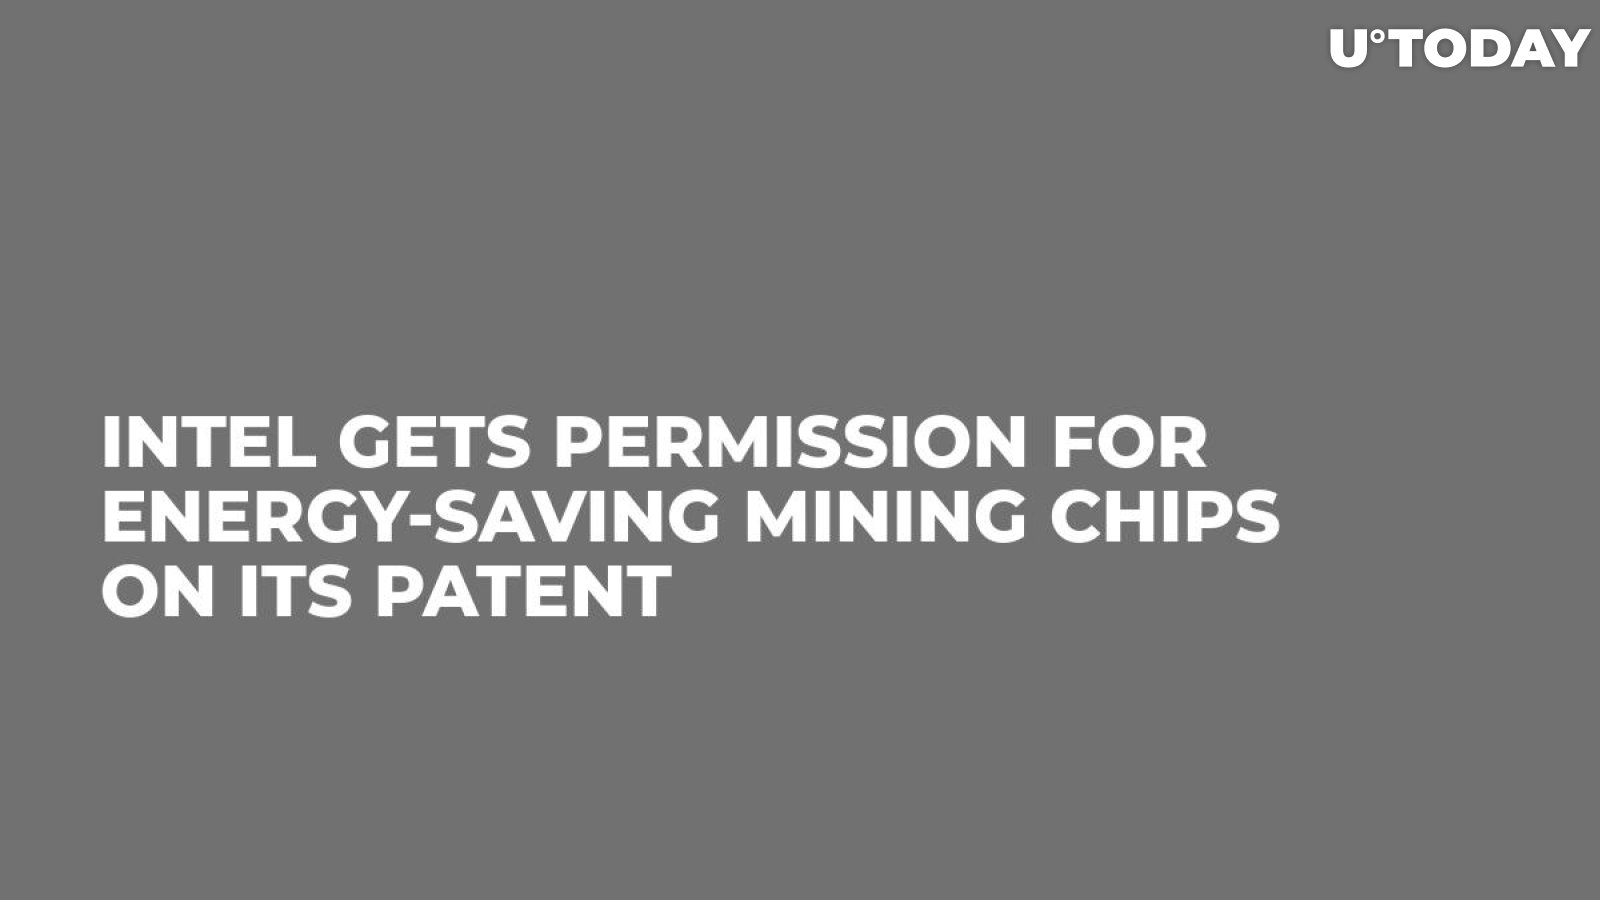 Intel Gets Permission for Energy-Saving Mining Chips on Its Patent